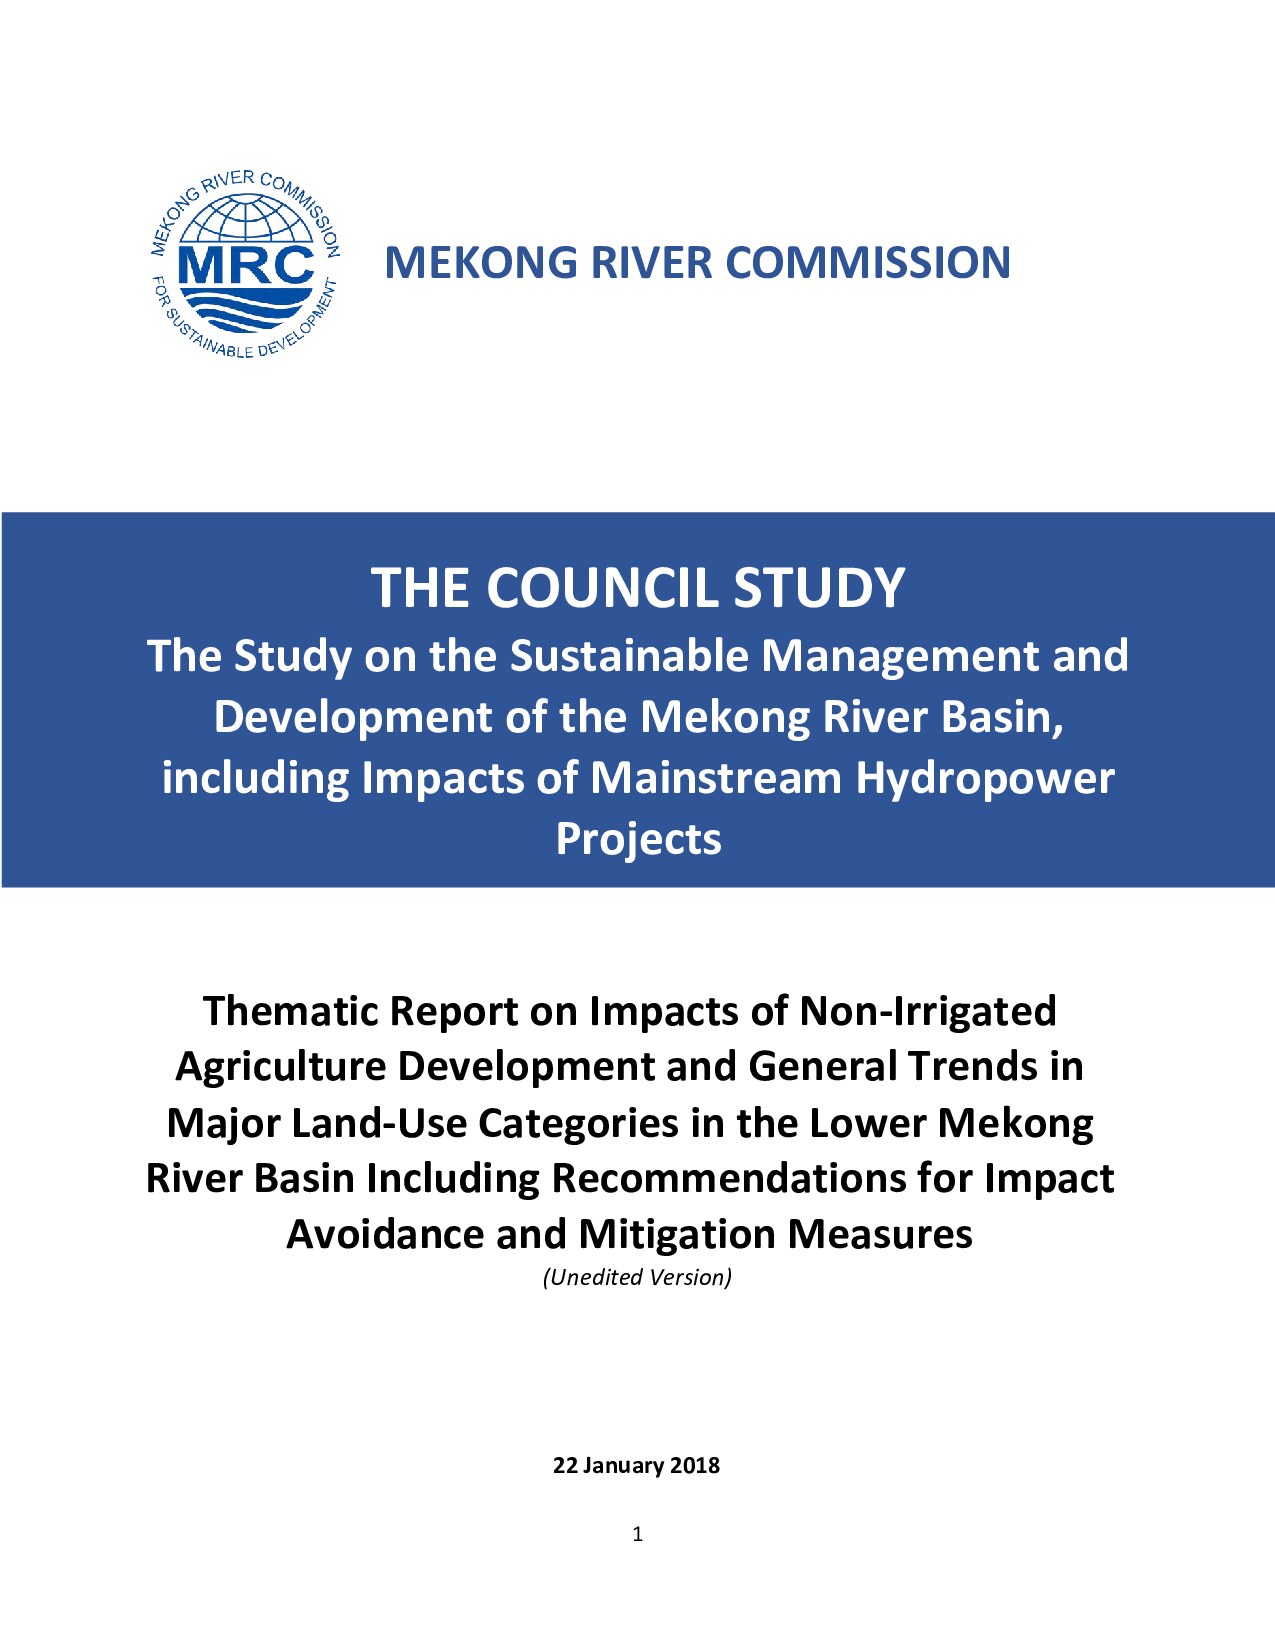 Thematic Report on Impacts of Non-Irrigated Agriculture Development and General Trends in Major Land-Use Categories in the Lower Mekong River Basin Including Recommendations for Impact Avoidance and Mitigation Measures